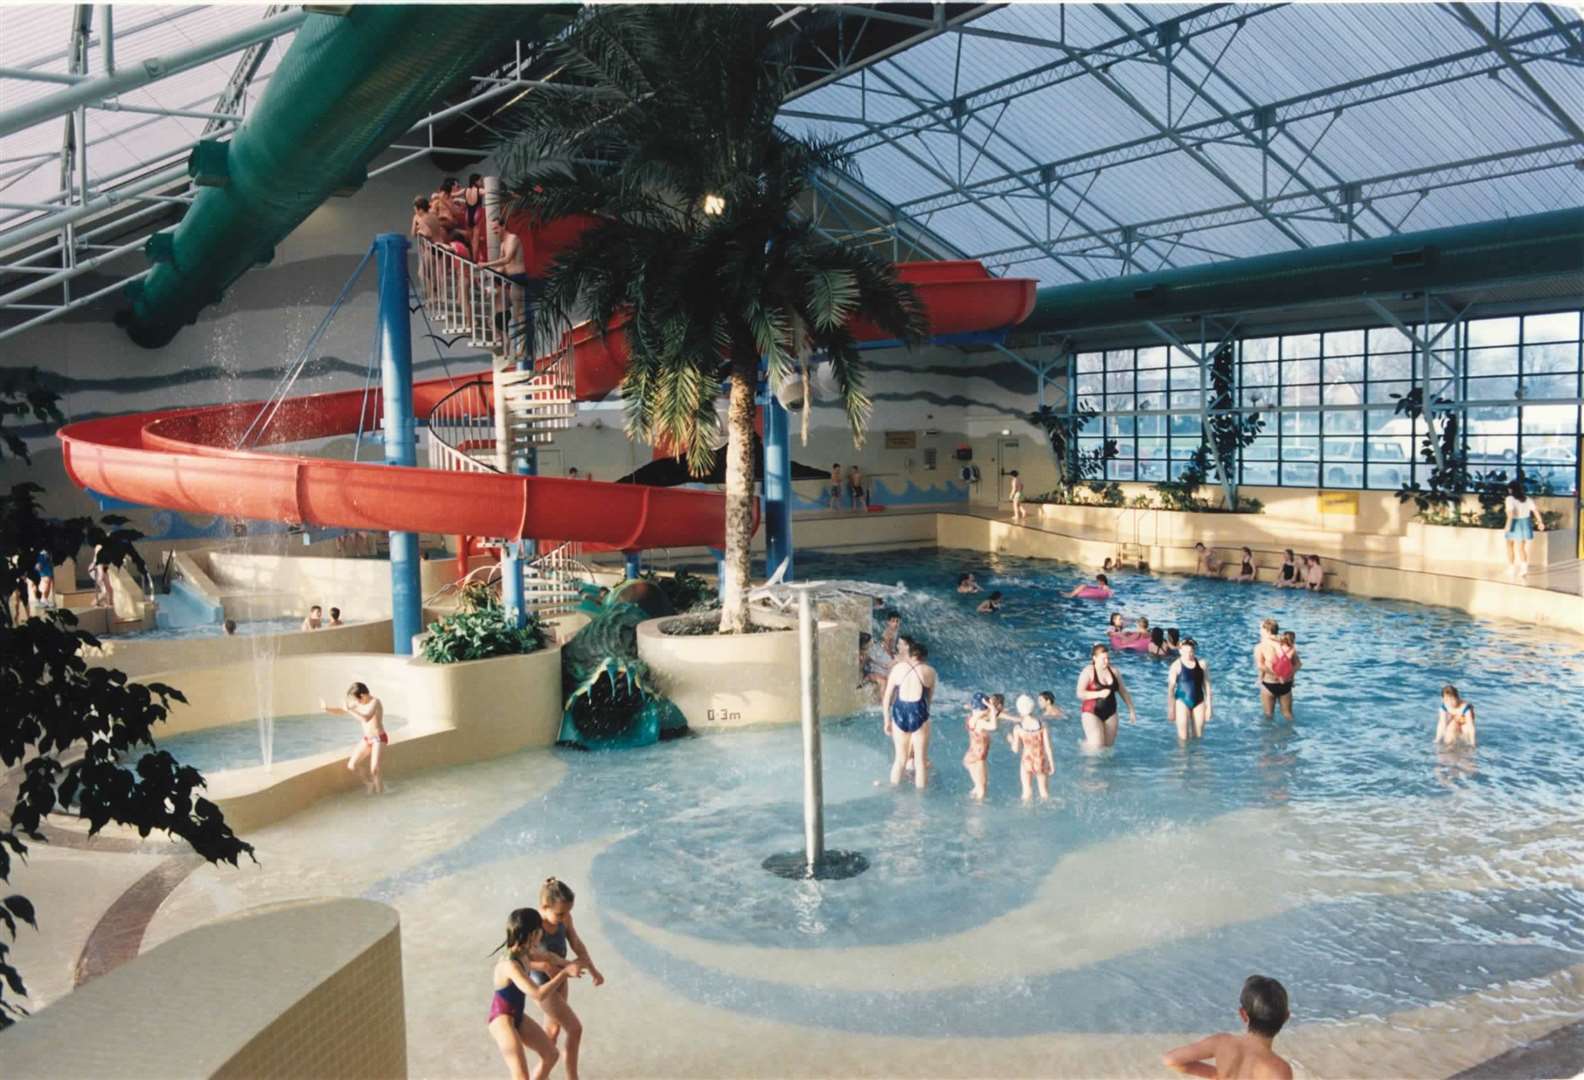 Tides swimming centre - opened in Deal by Barbara Windsor in 1988 - is pictured here on January 7, 1992